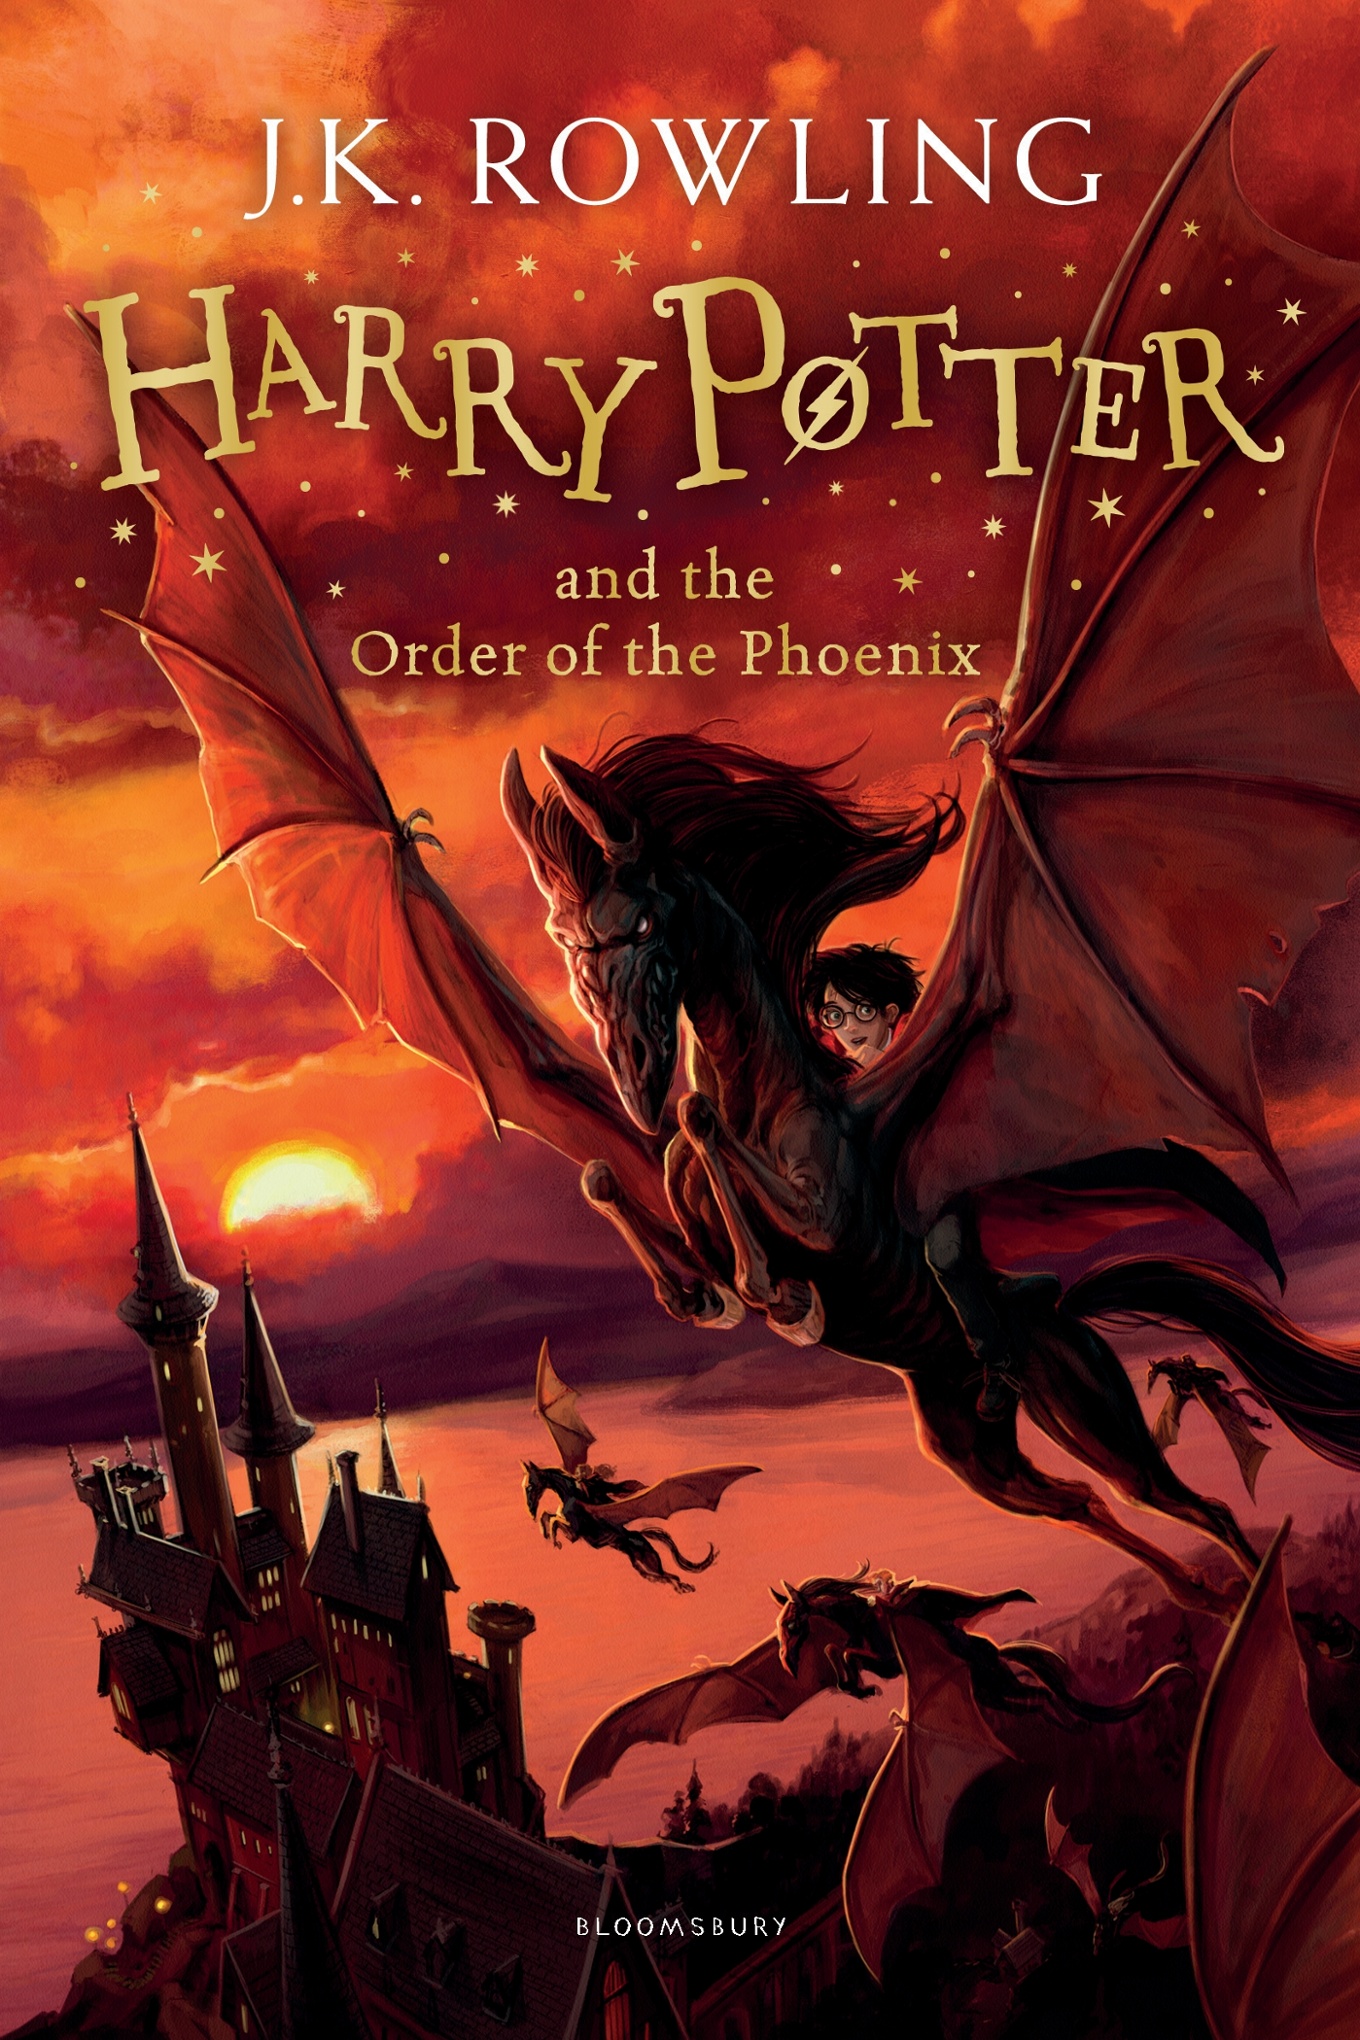 New Harry Potter covers revealed | Children's books | The Guardian